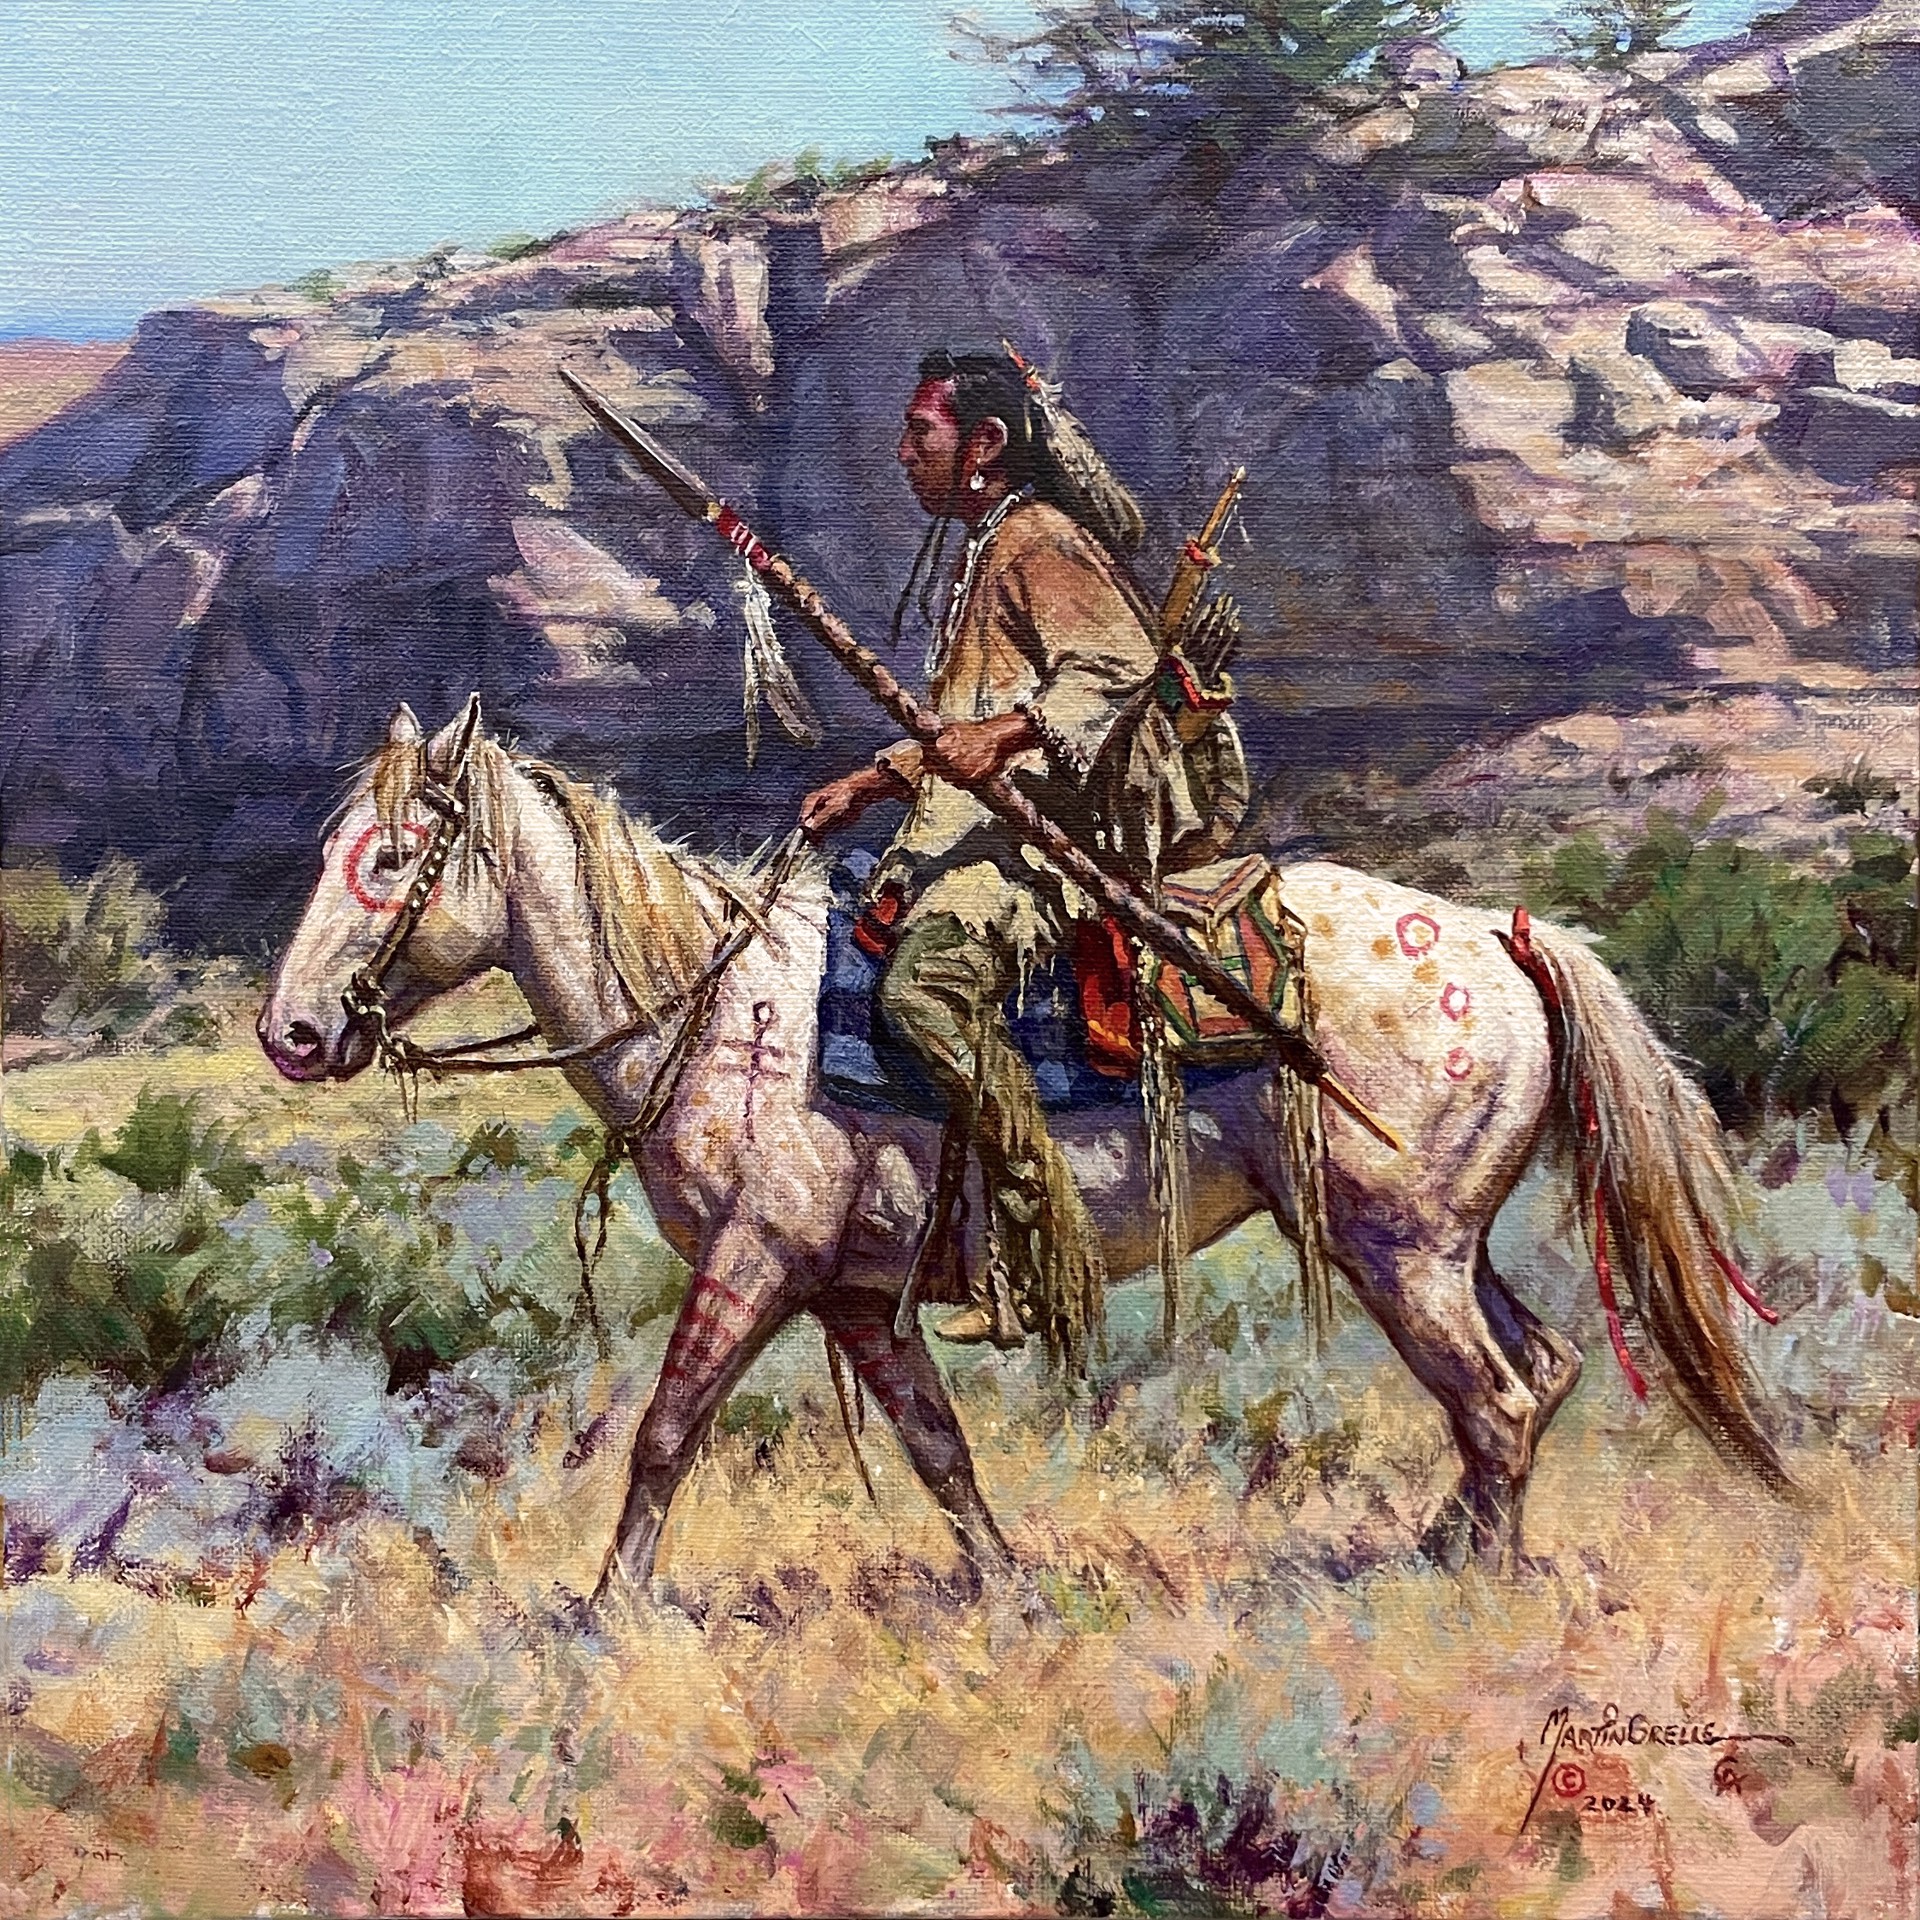 Trail to Arrow Creek by Martin Grelle